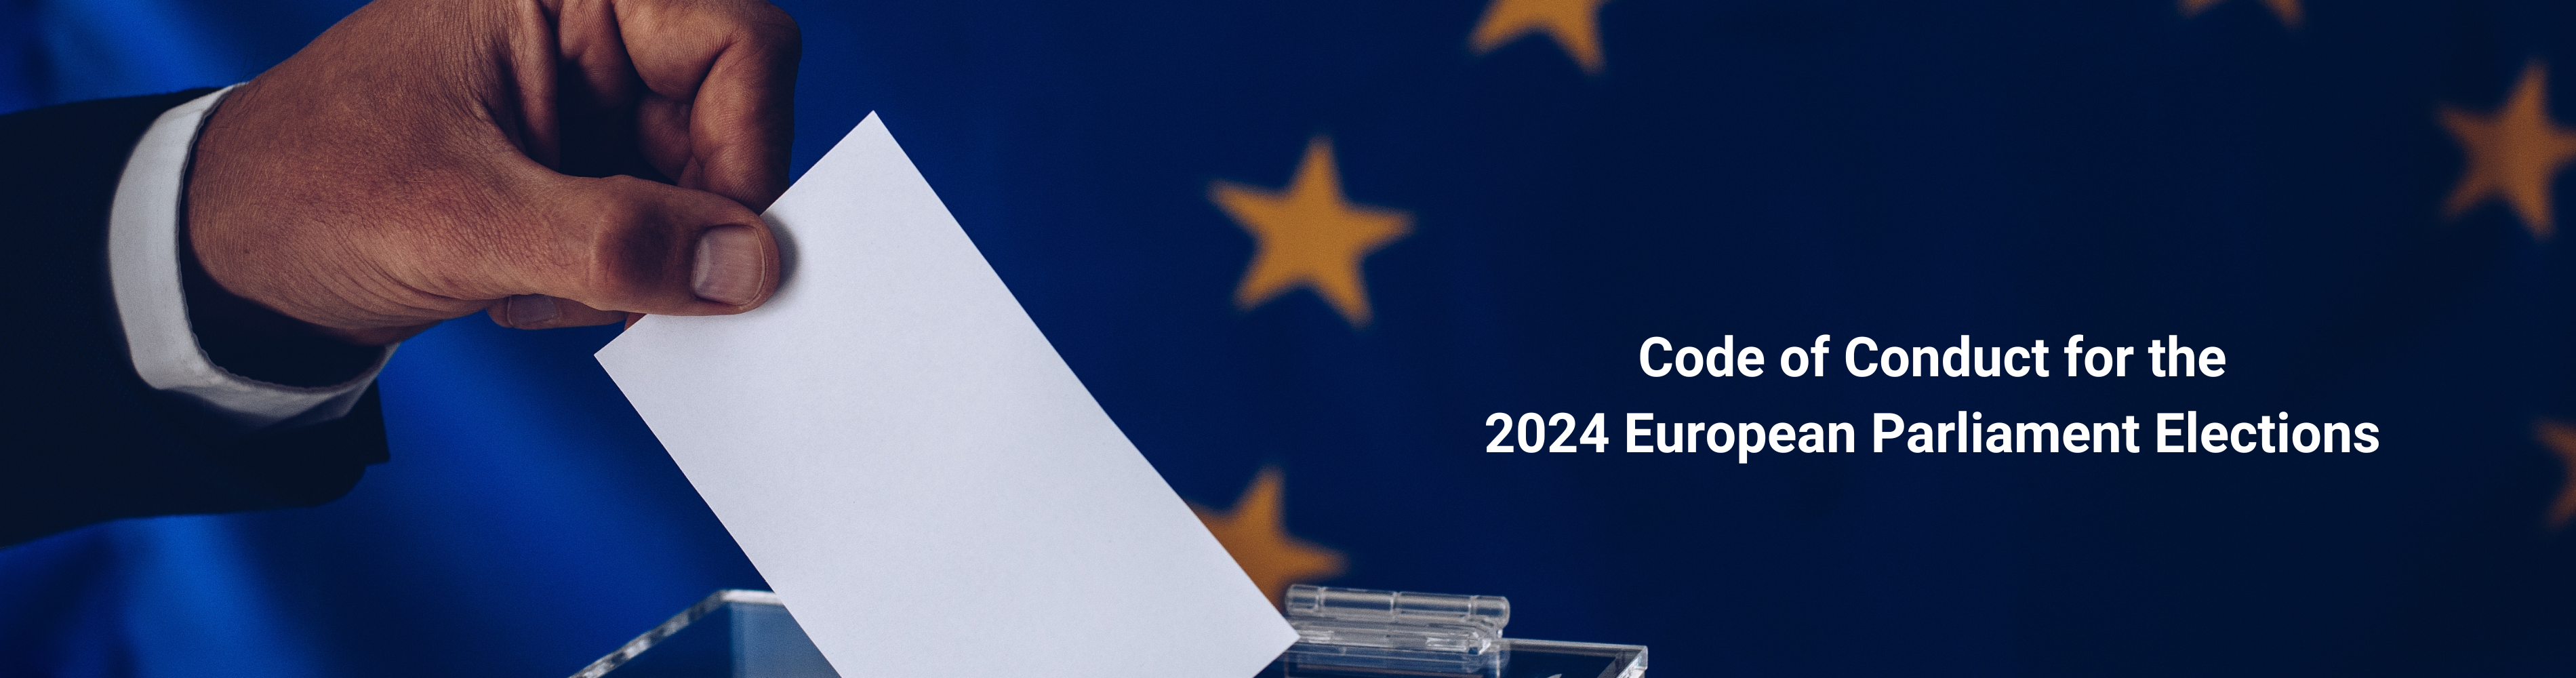 Code of Conduct for the 2024 European Parliament Elections-homepage